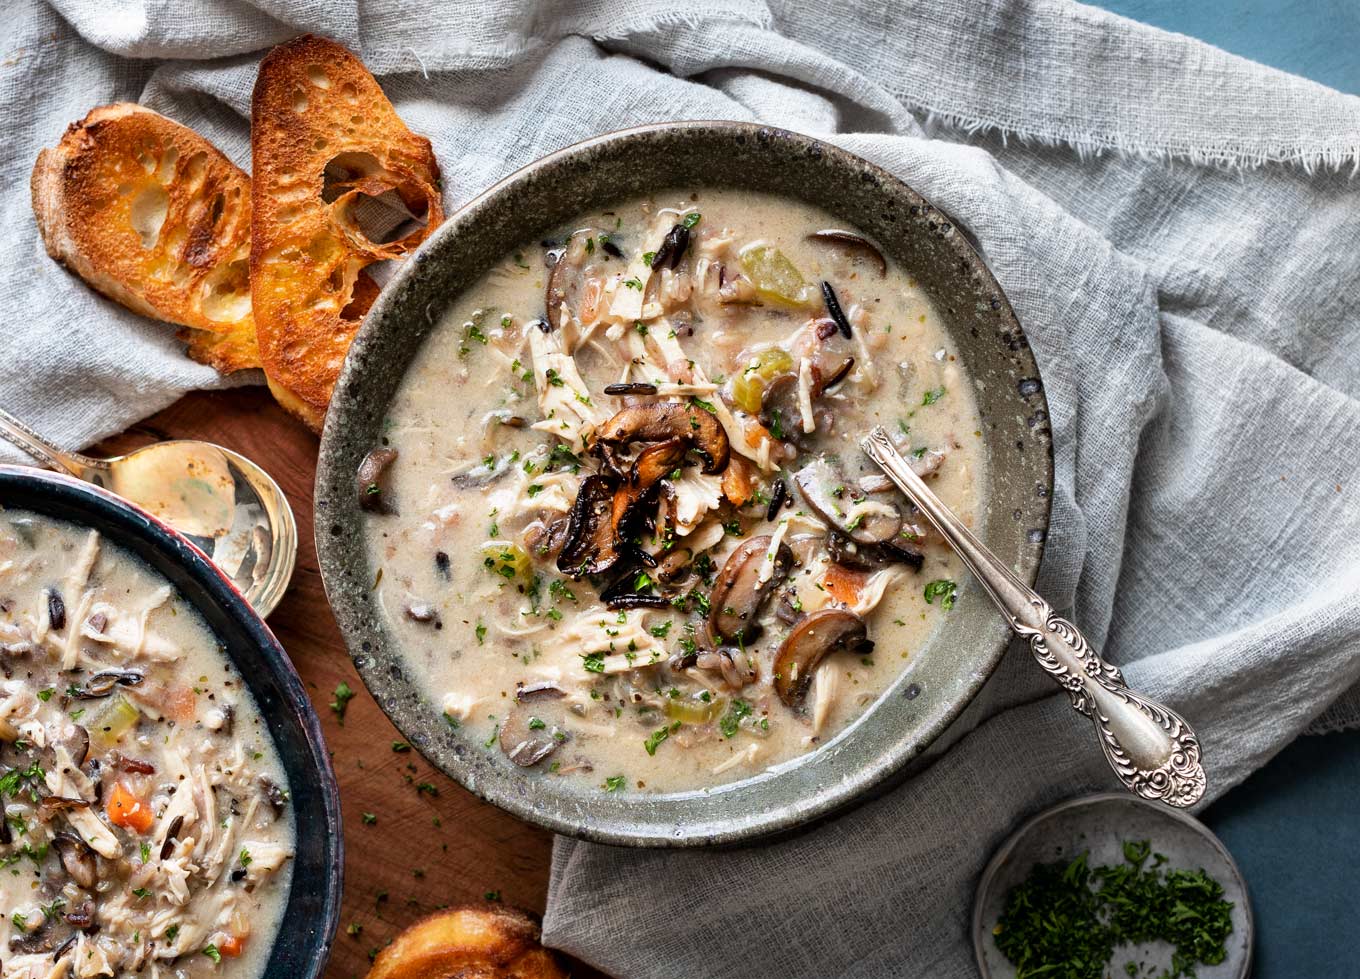 South Your Mouth: Chicken & Wild Rice Soup